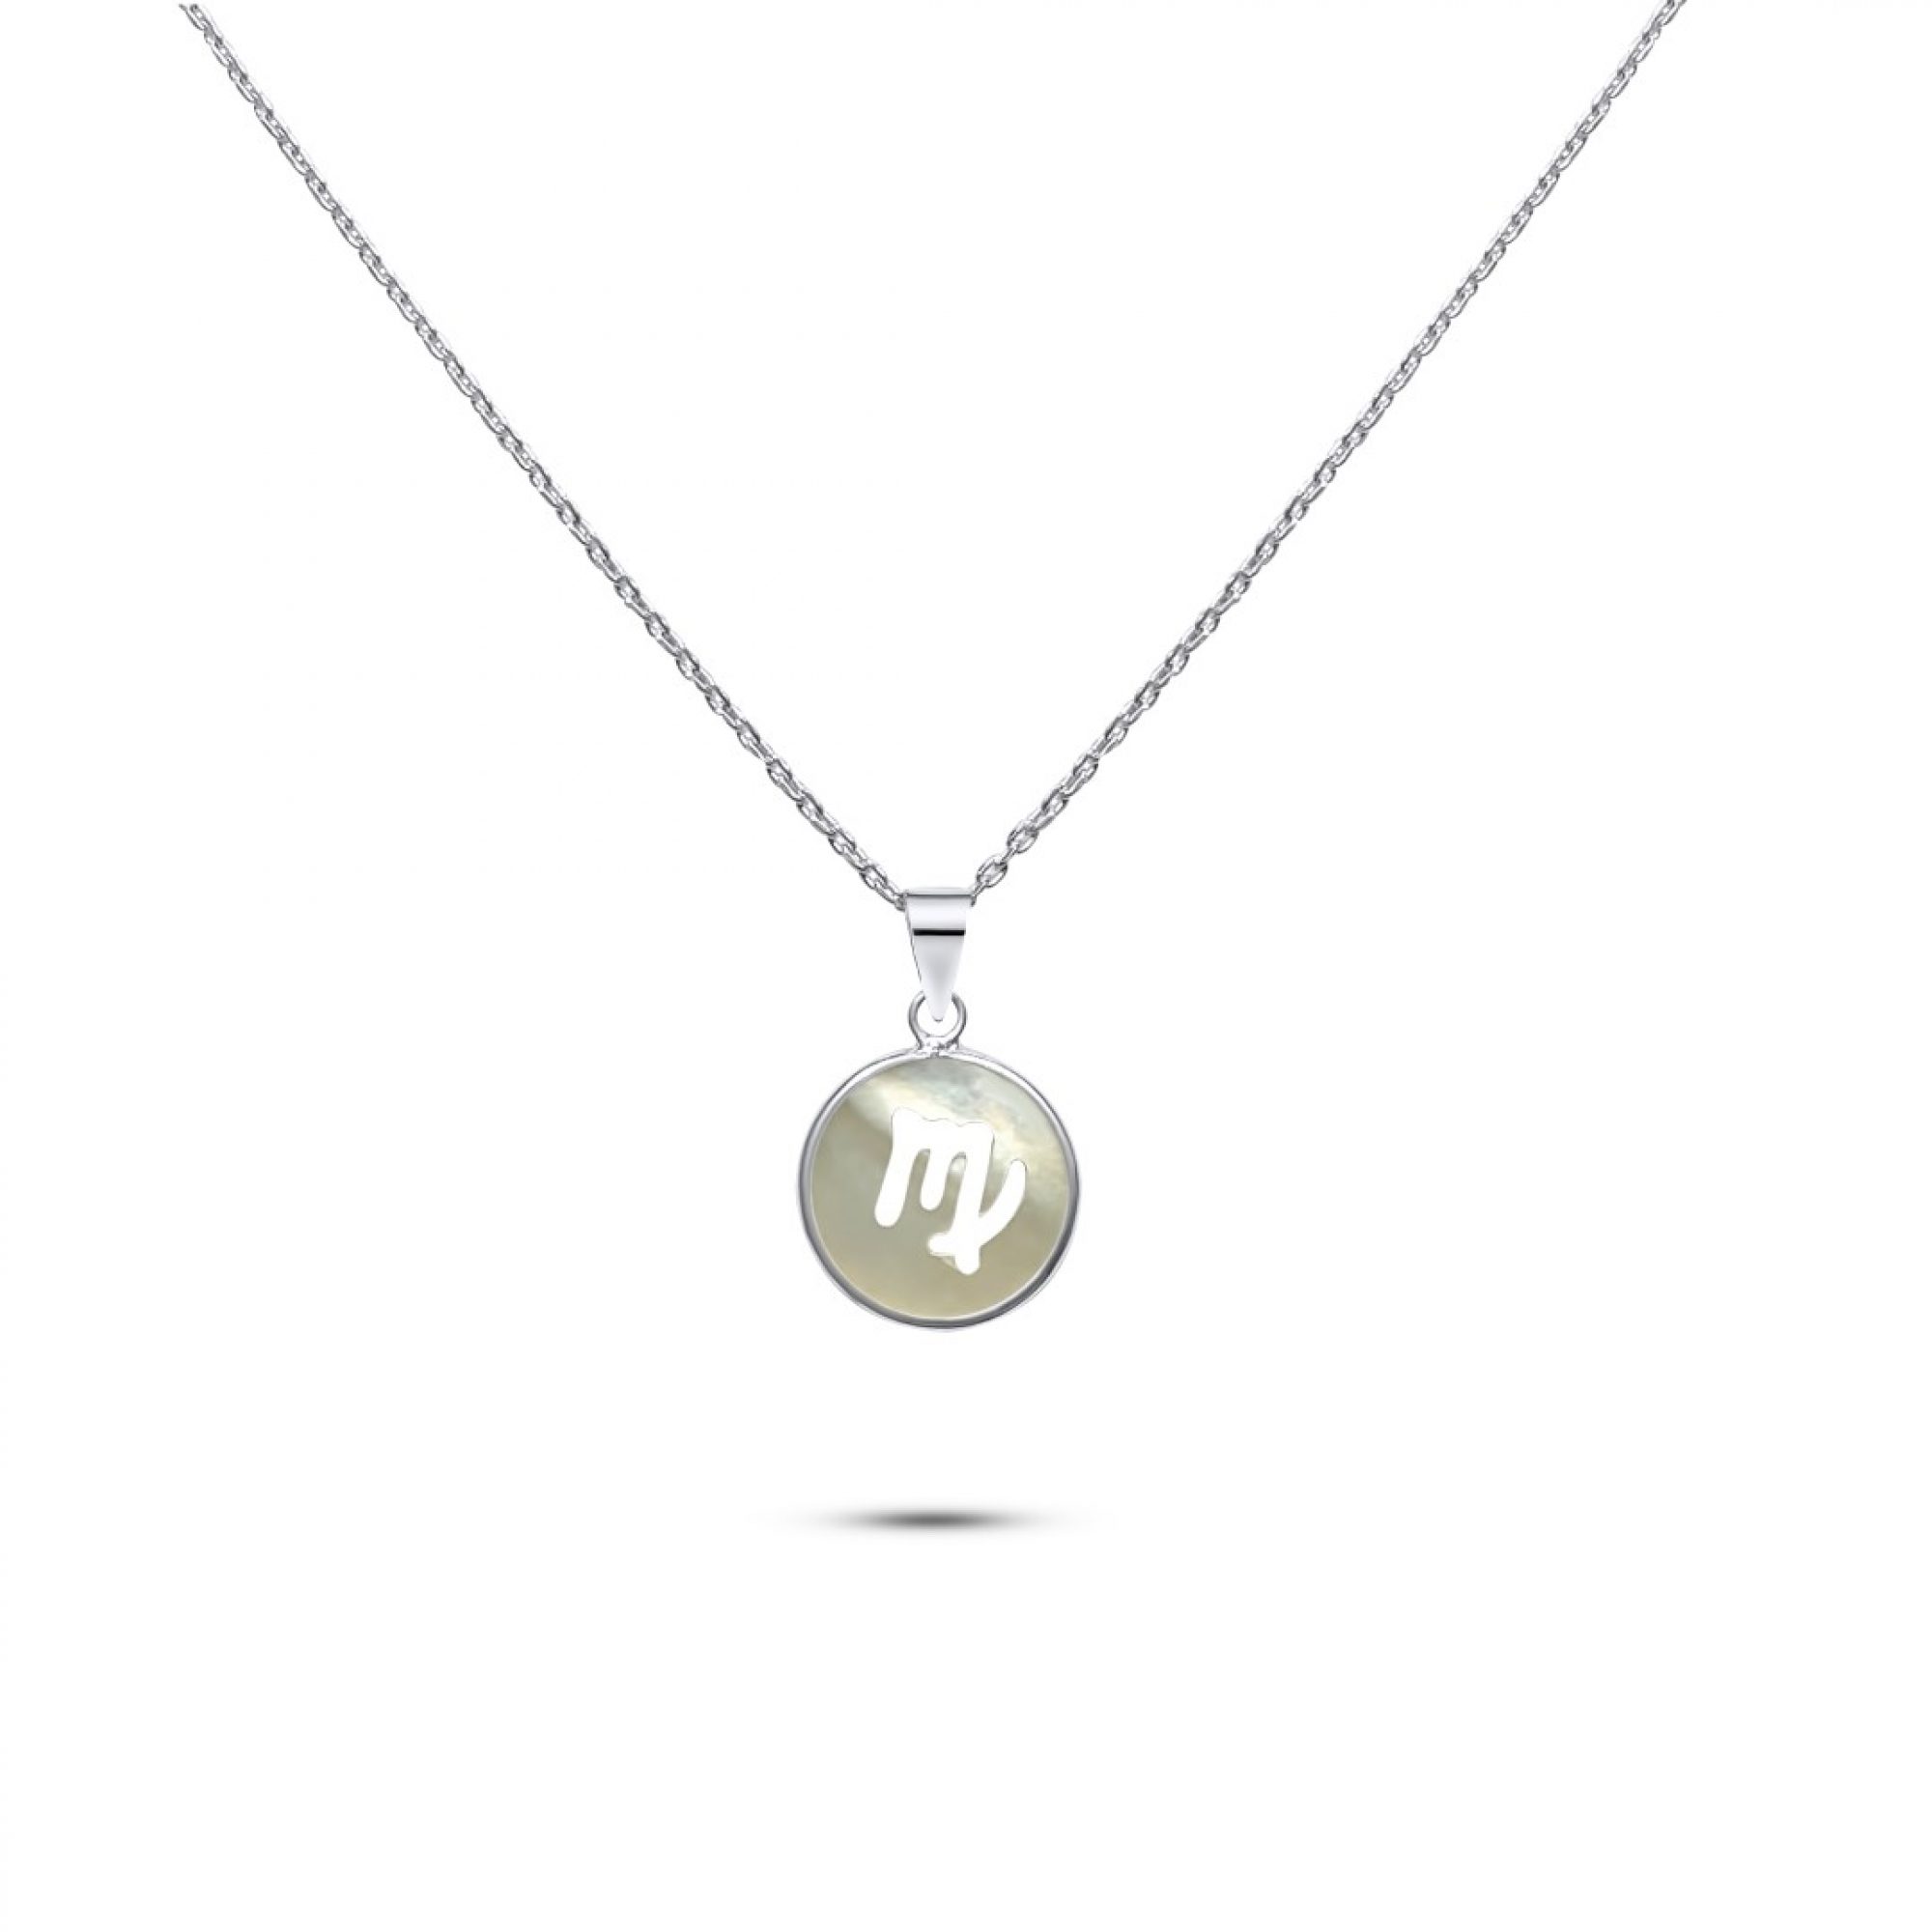 Virgo sign necklace with mother of pearl